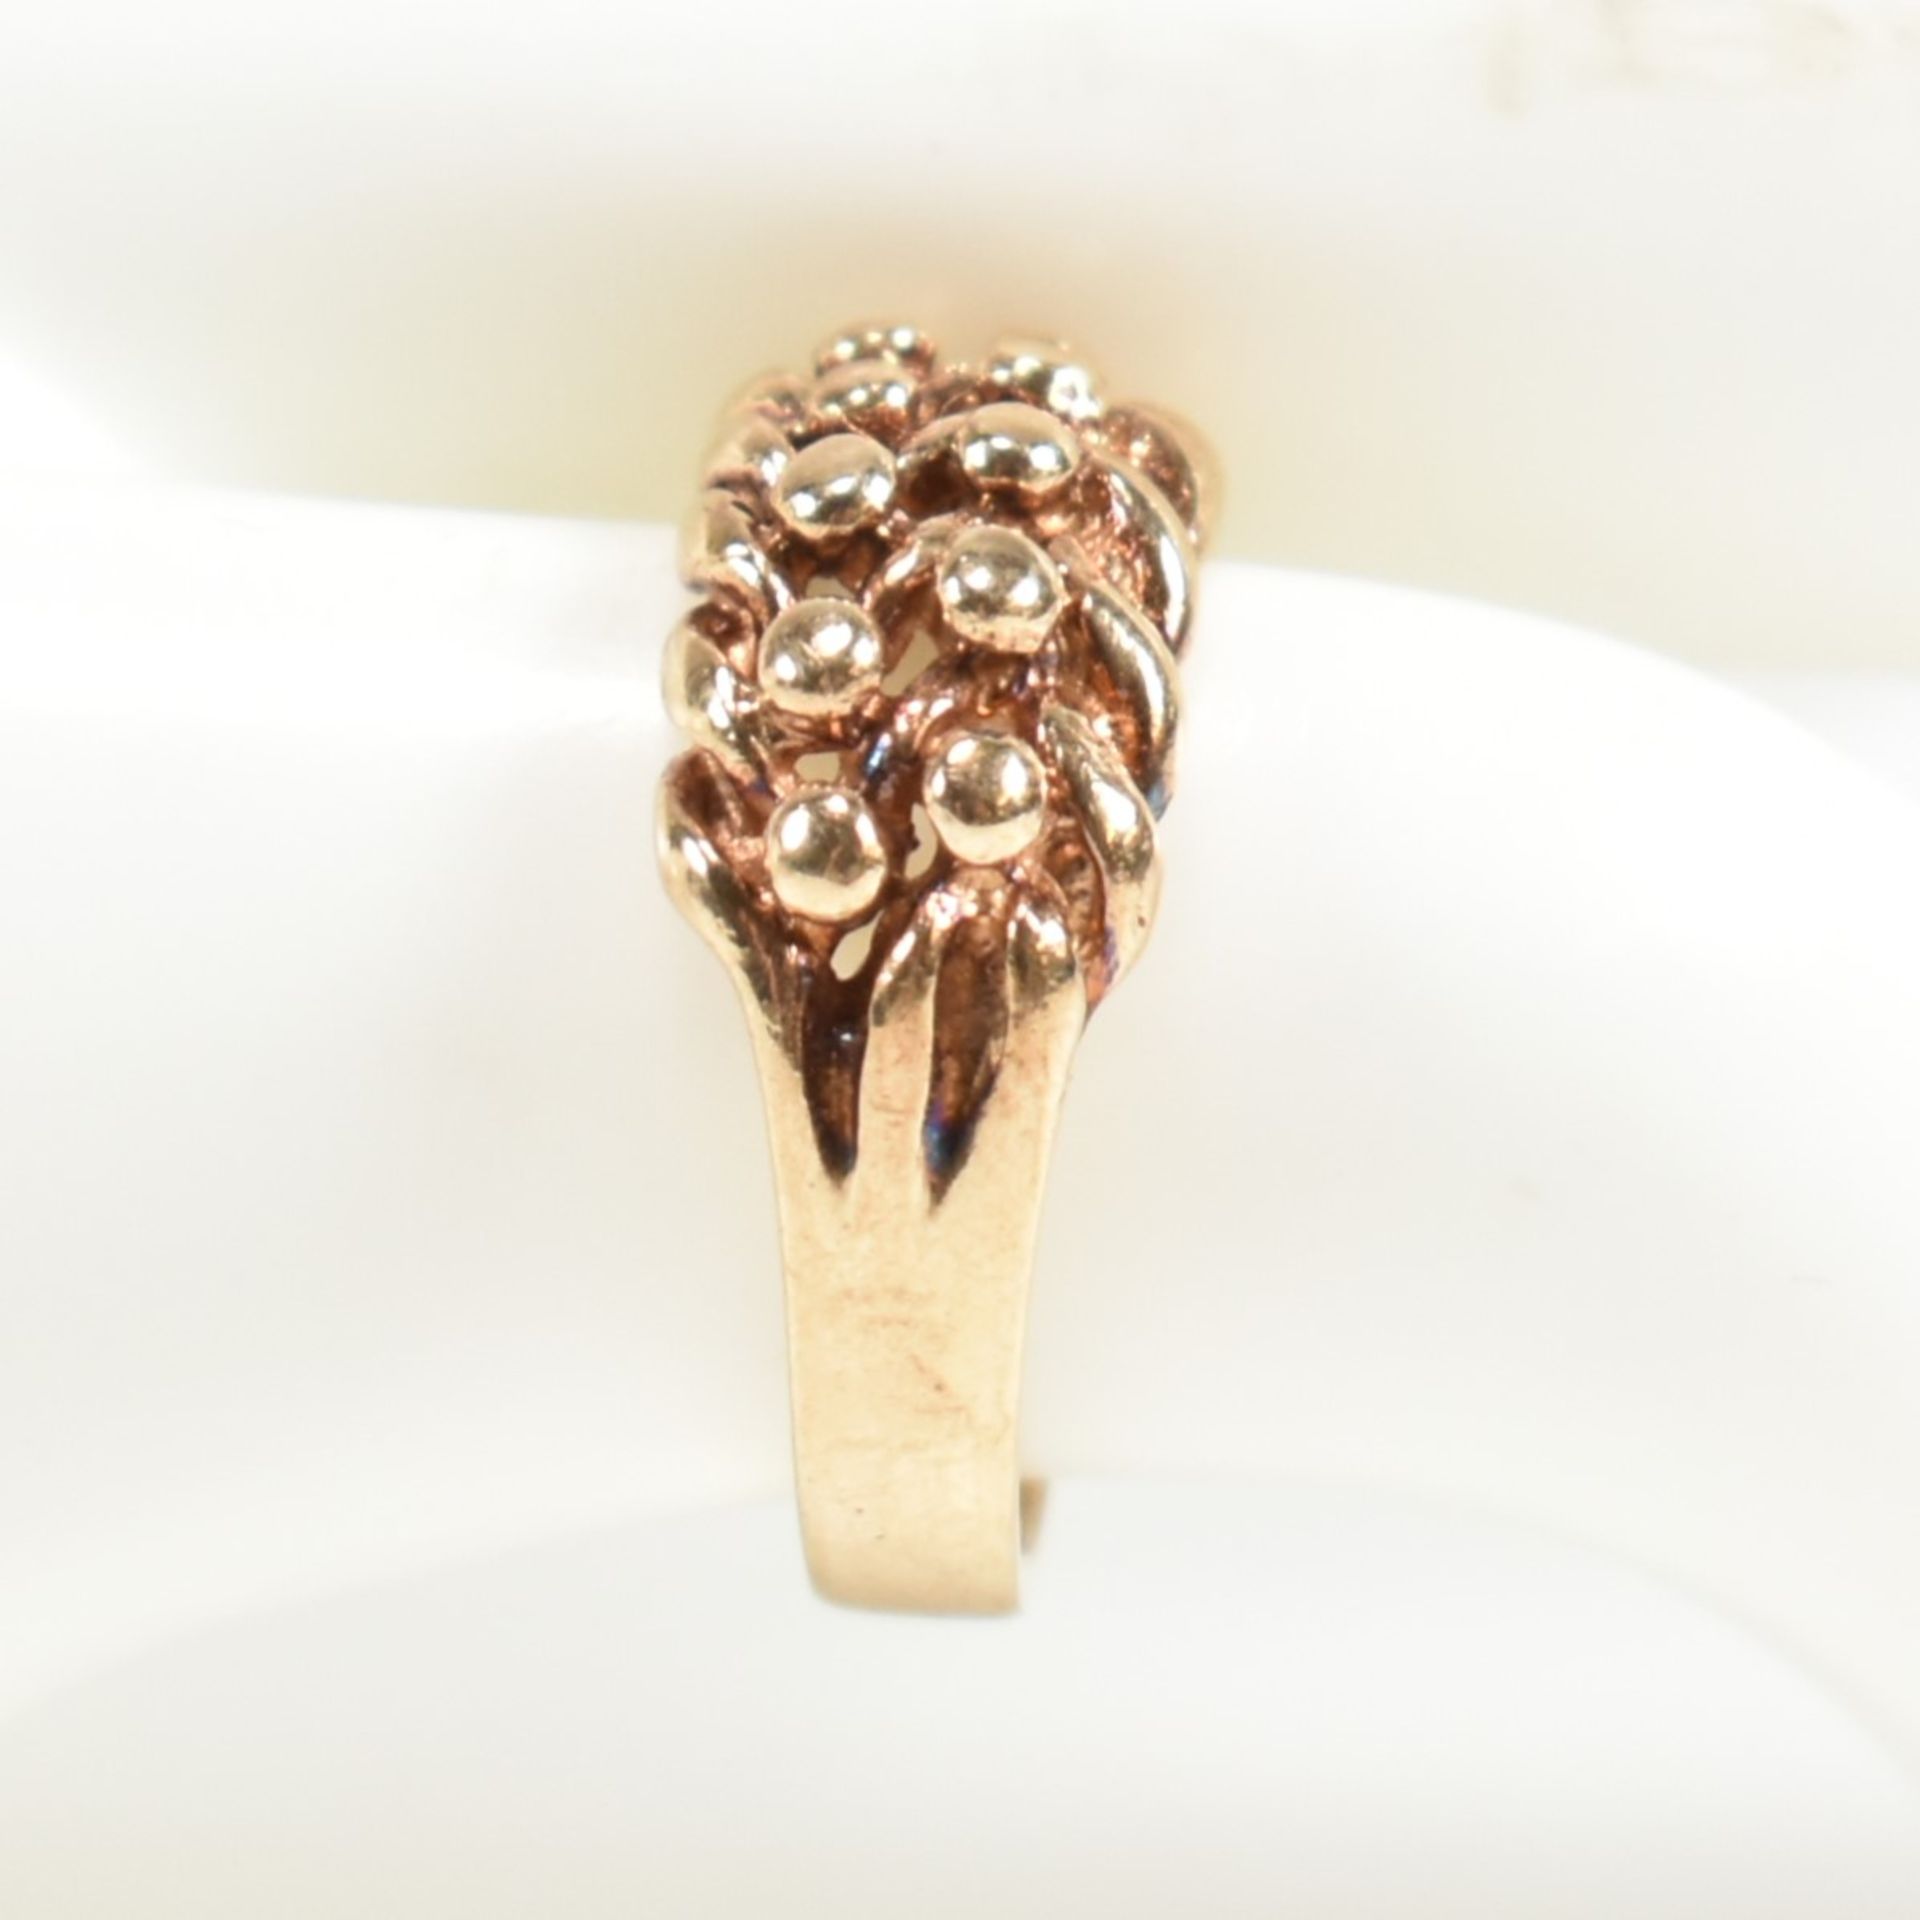 HALLMARKED 9CT GOLD KEEPER RING - Image 5 of 10